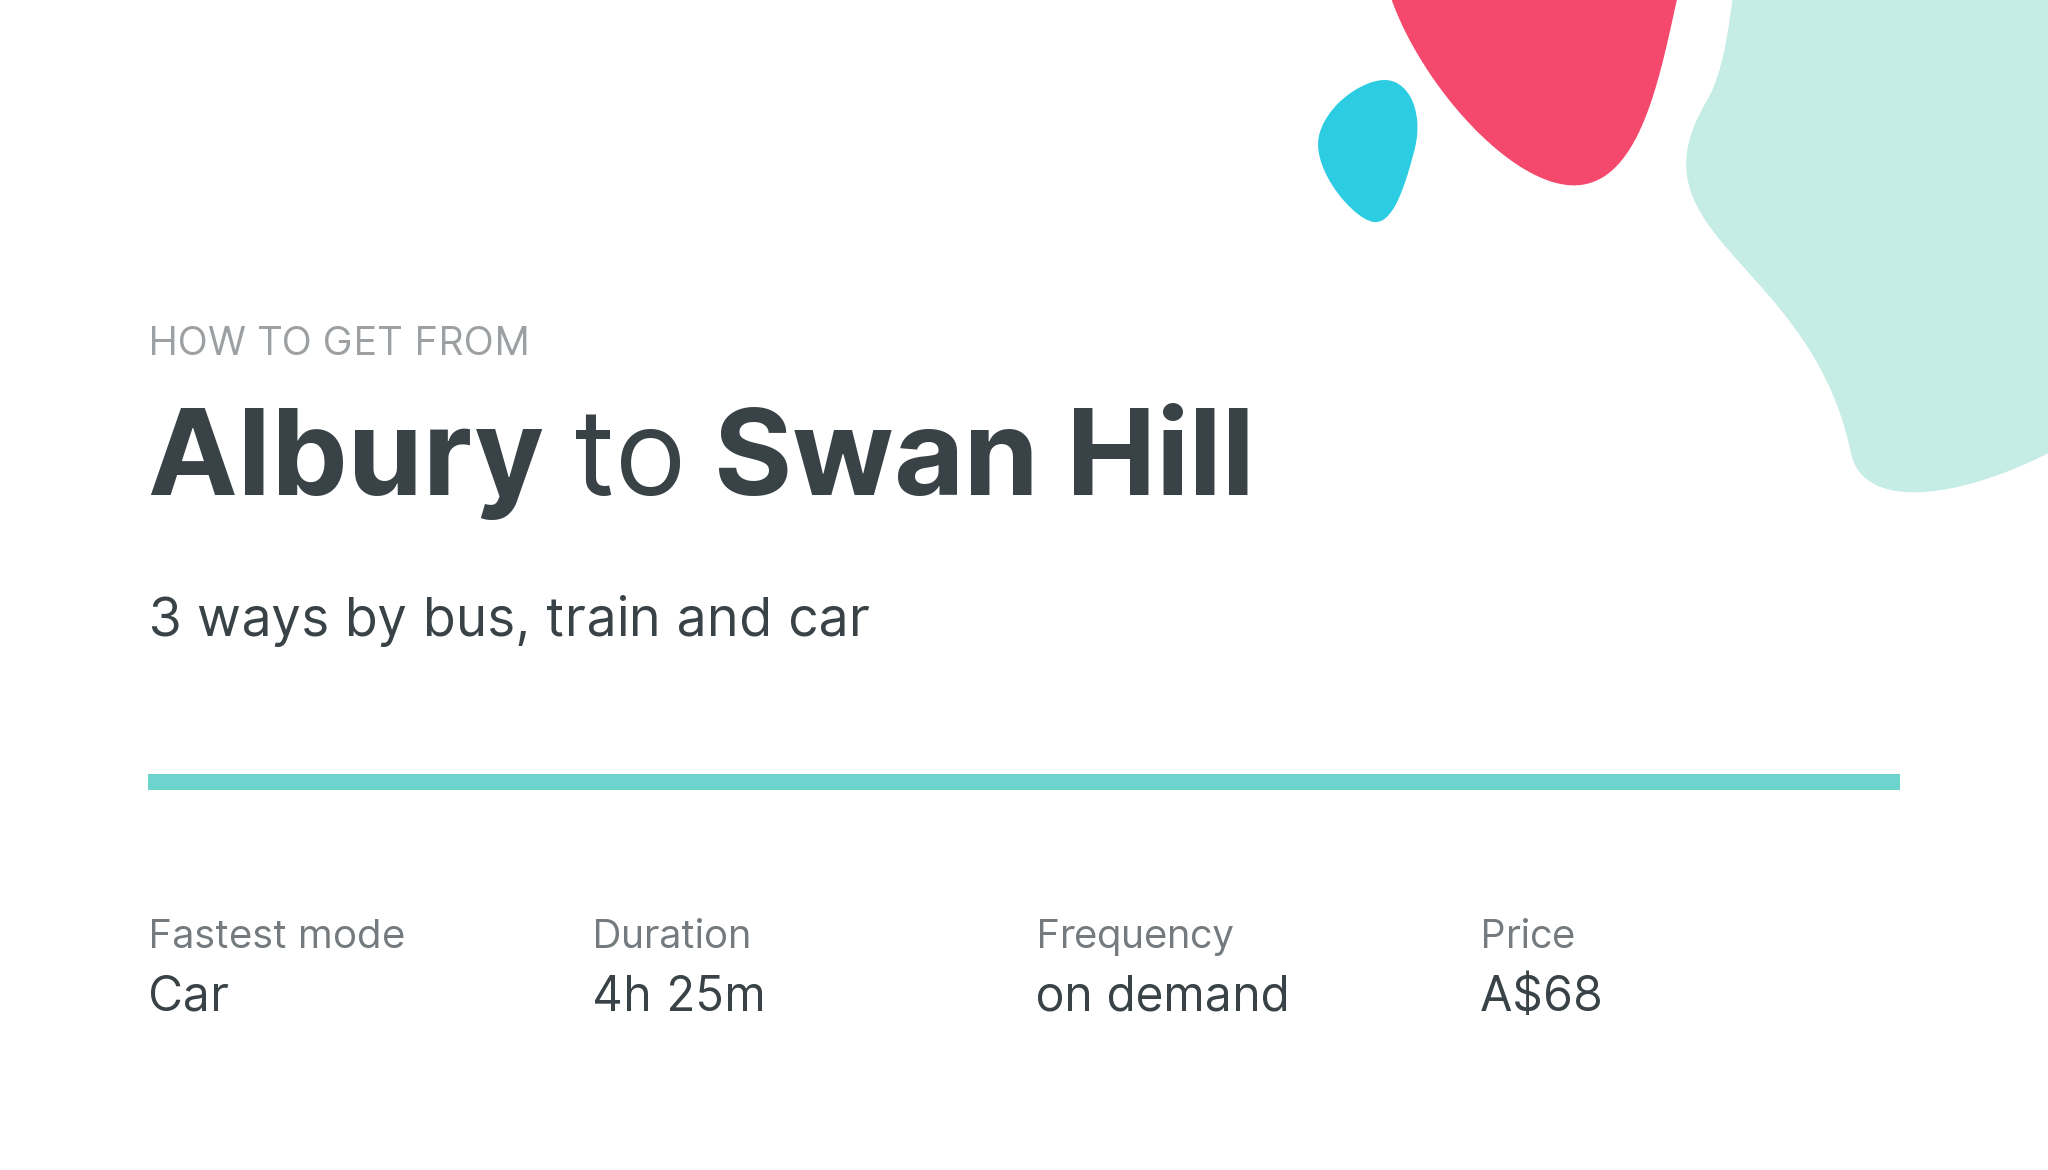 How do I get from Albury to Swan Hill